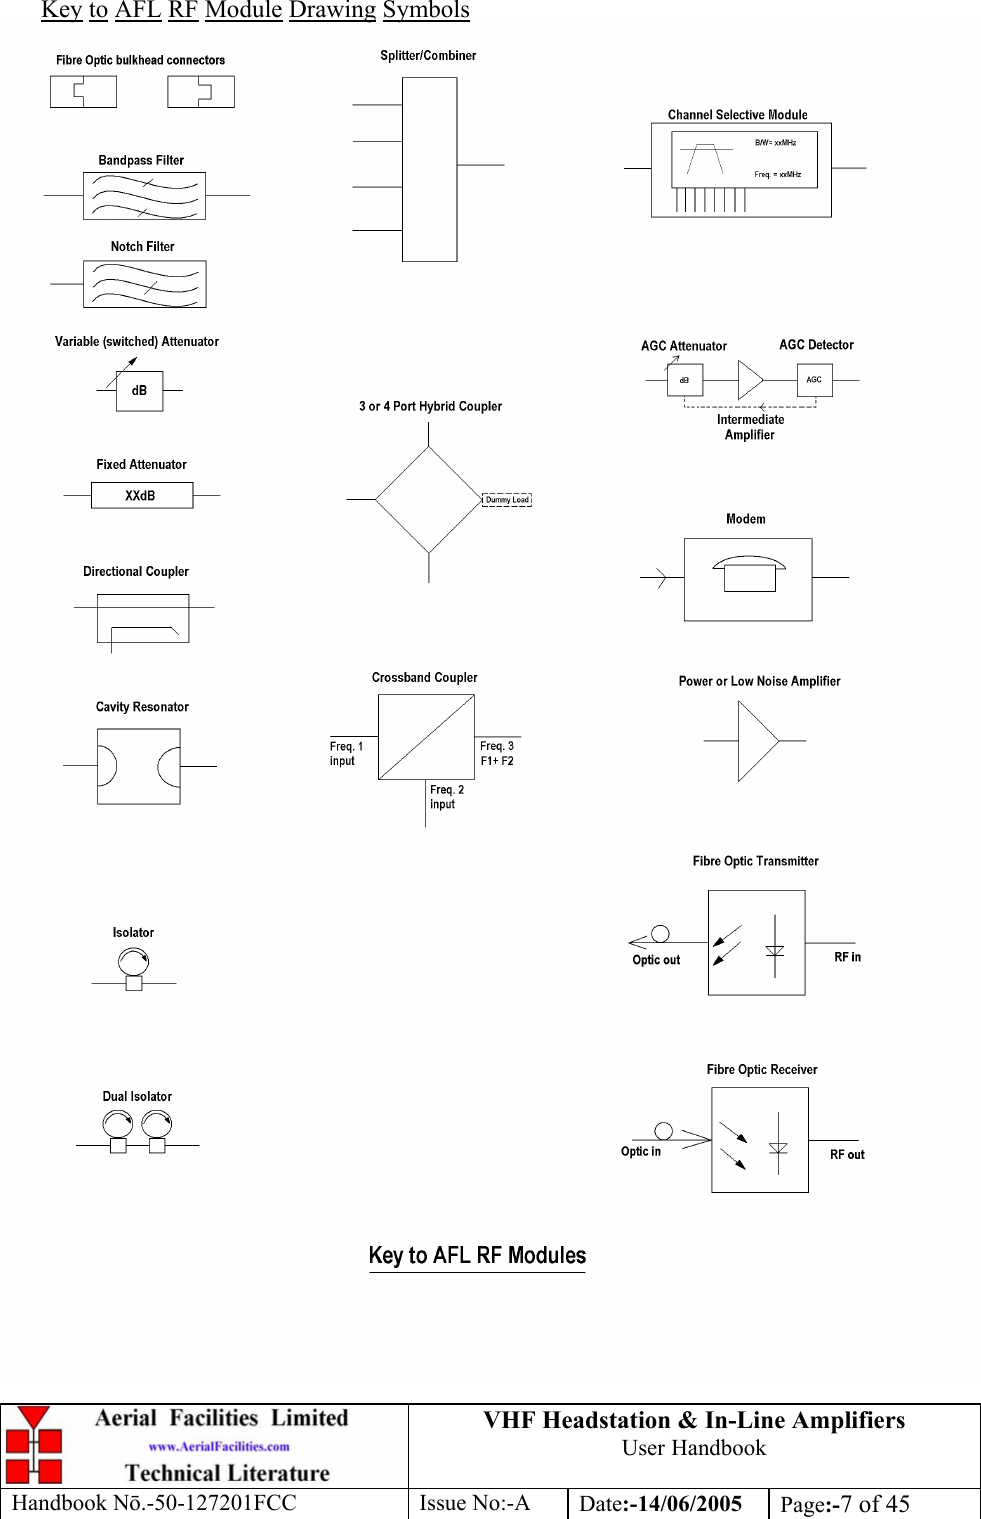 VHF Headstation &amp; In-Line Amplifiers User Handbook Handbook Nō.-50-127201FCC Issue No:-A Date:-14/06/2005  Page:-7 of 45  Key to AFL RF Module Drawing Symbols  